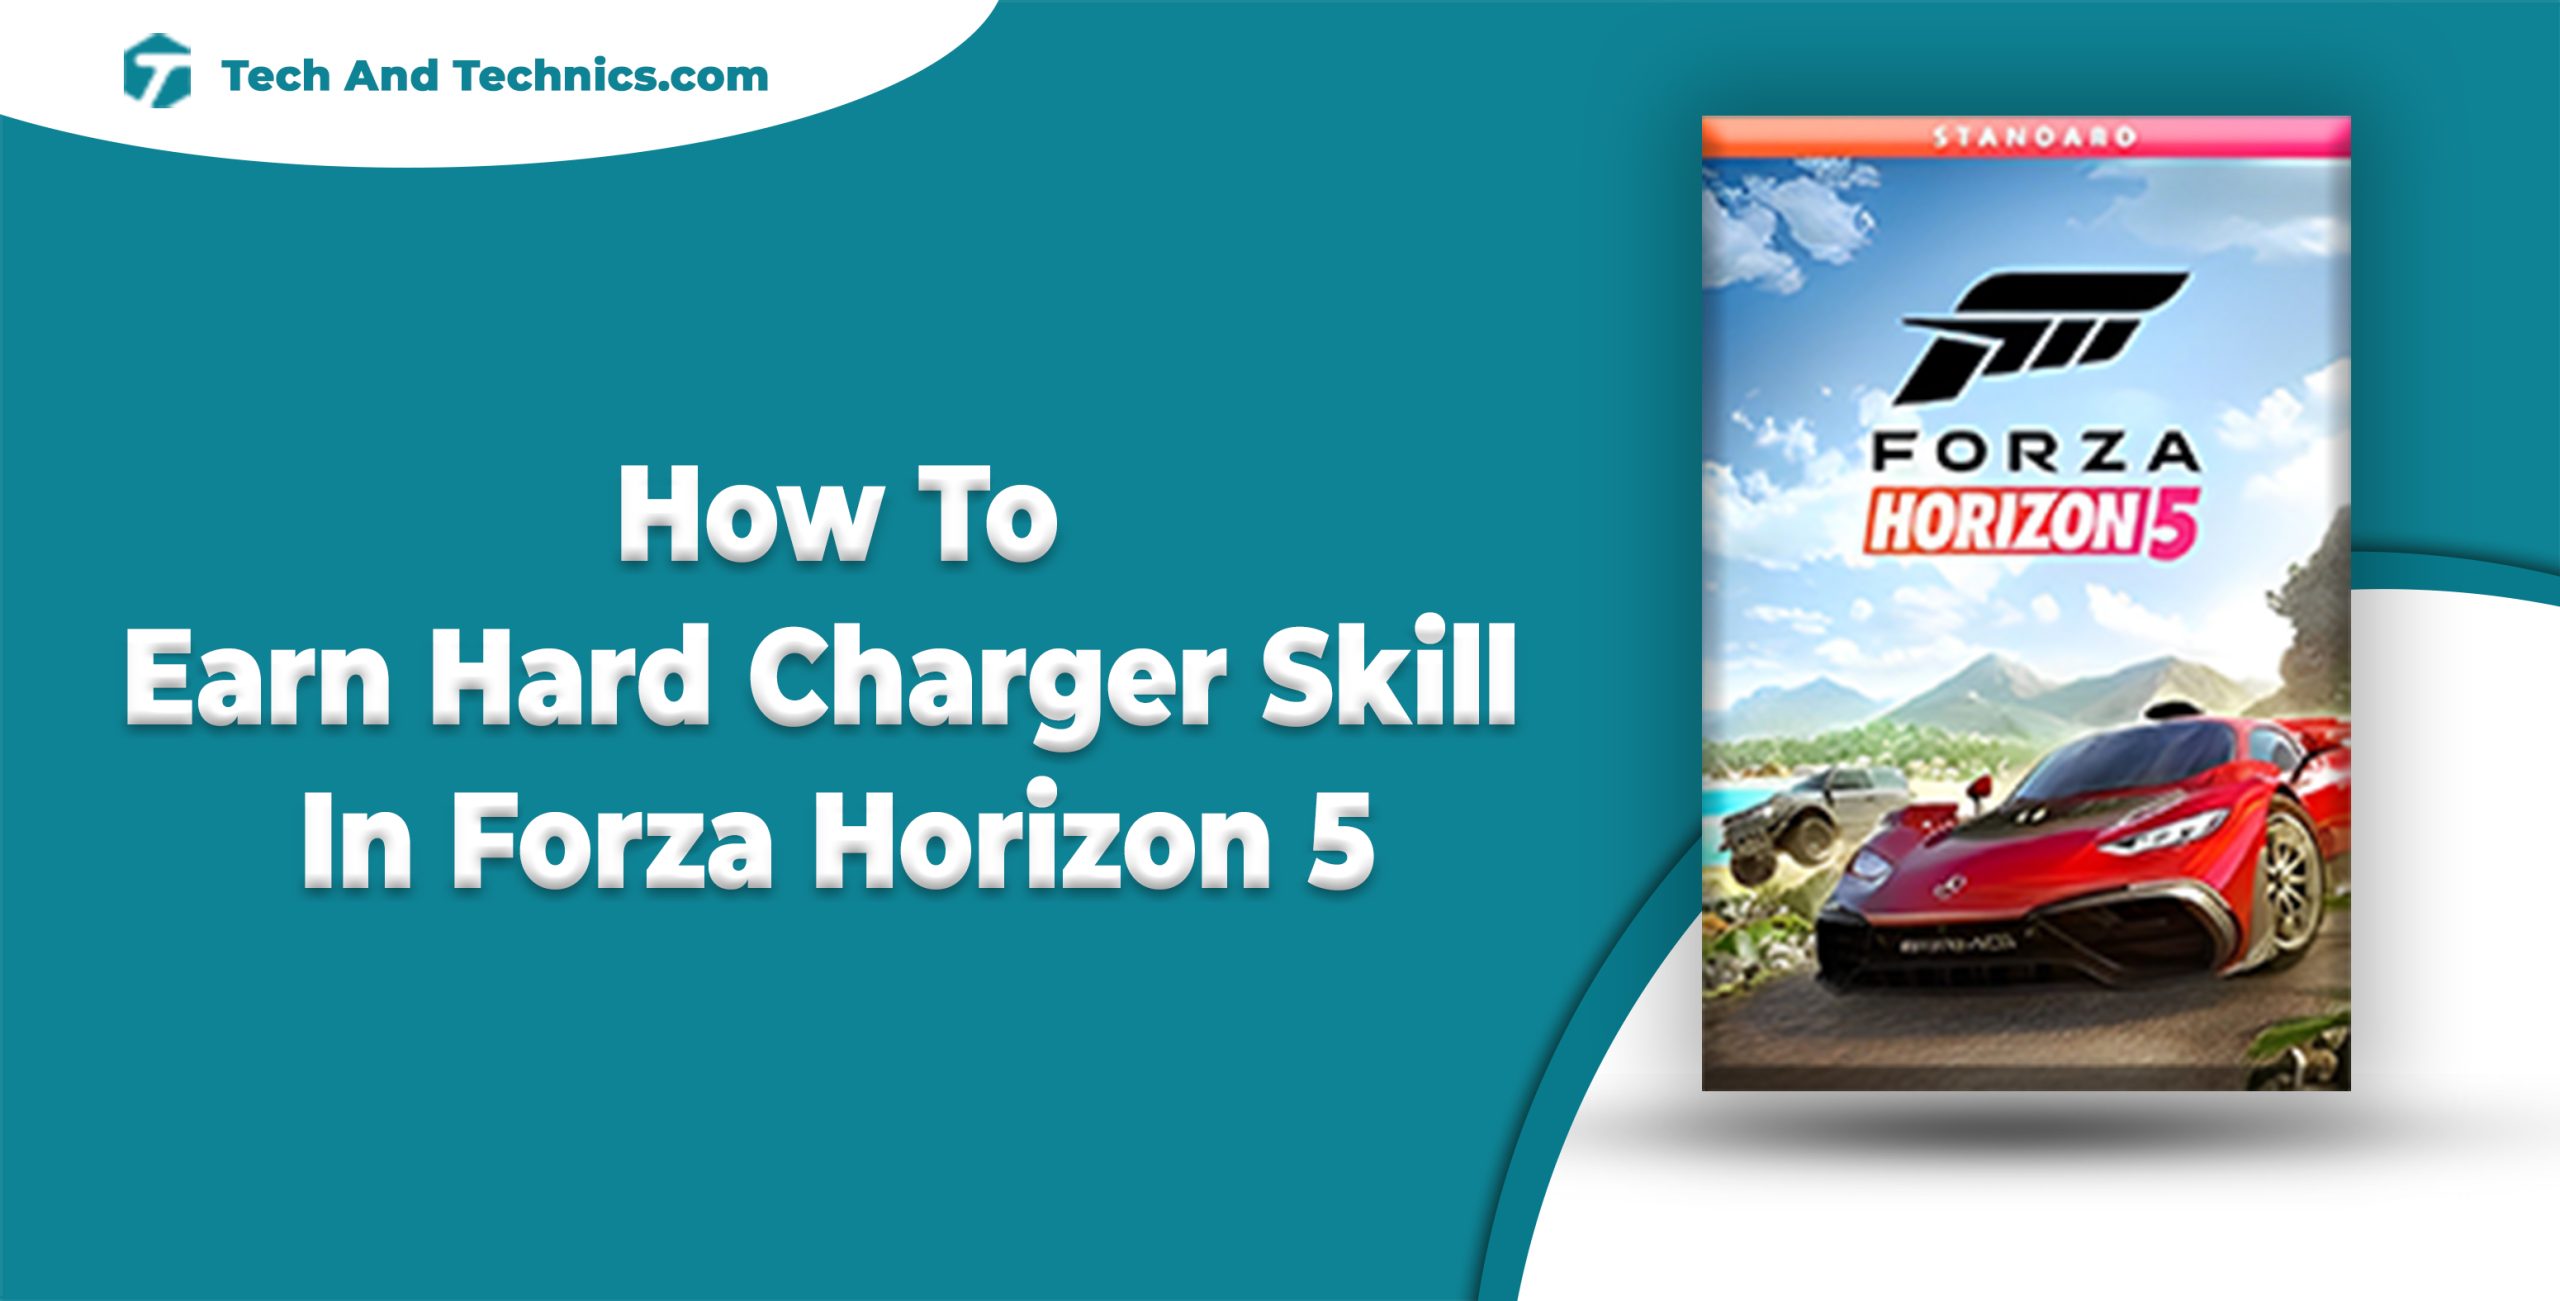 How To Earn Hard Charger Skill In Forza Horizon 5 (Guide)